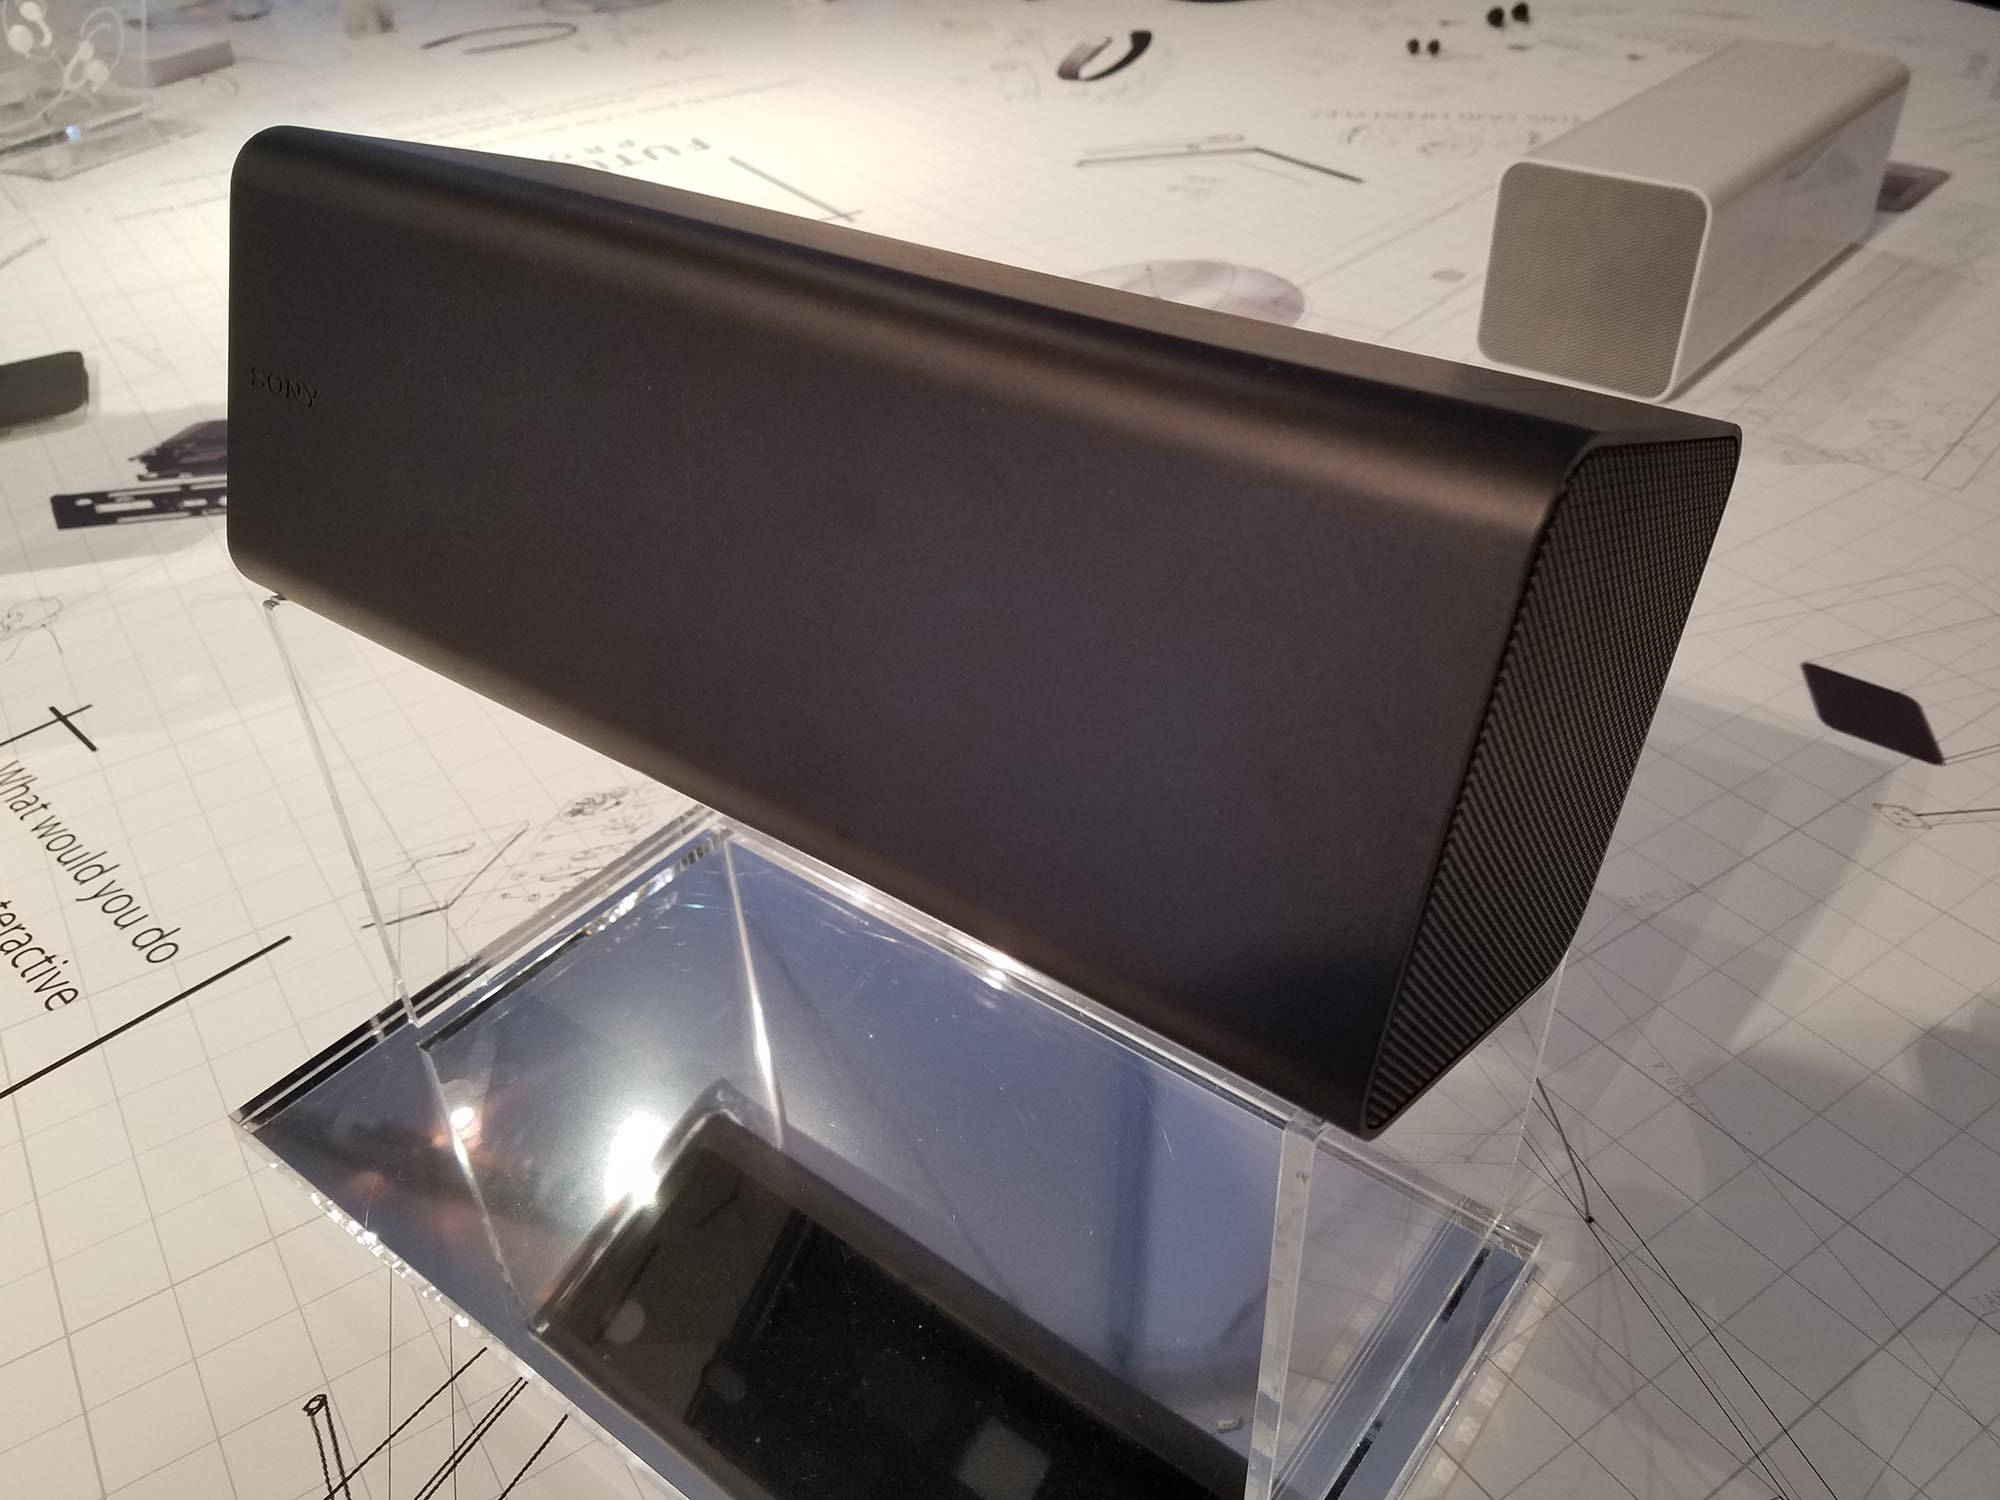 A concept prototype of Sony's interactive display projector.